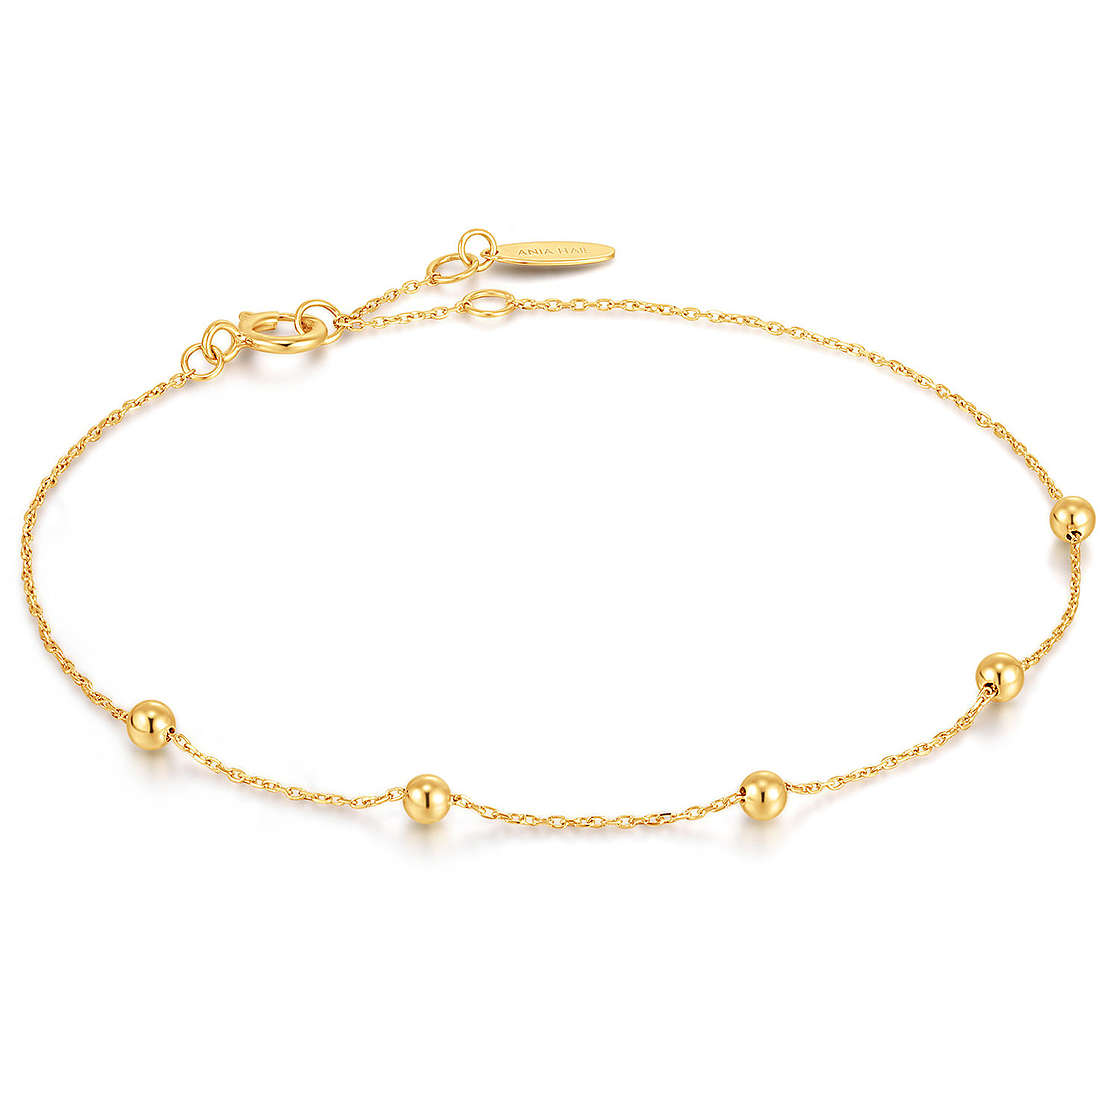 Ania Haie Gold Collection bracelet woman Bracelet with 14kt Gold Chain jewel BAU001-07YG